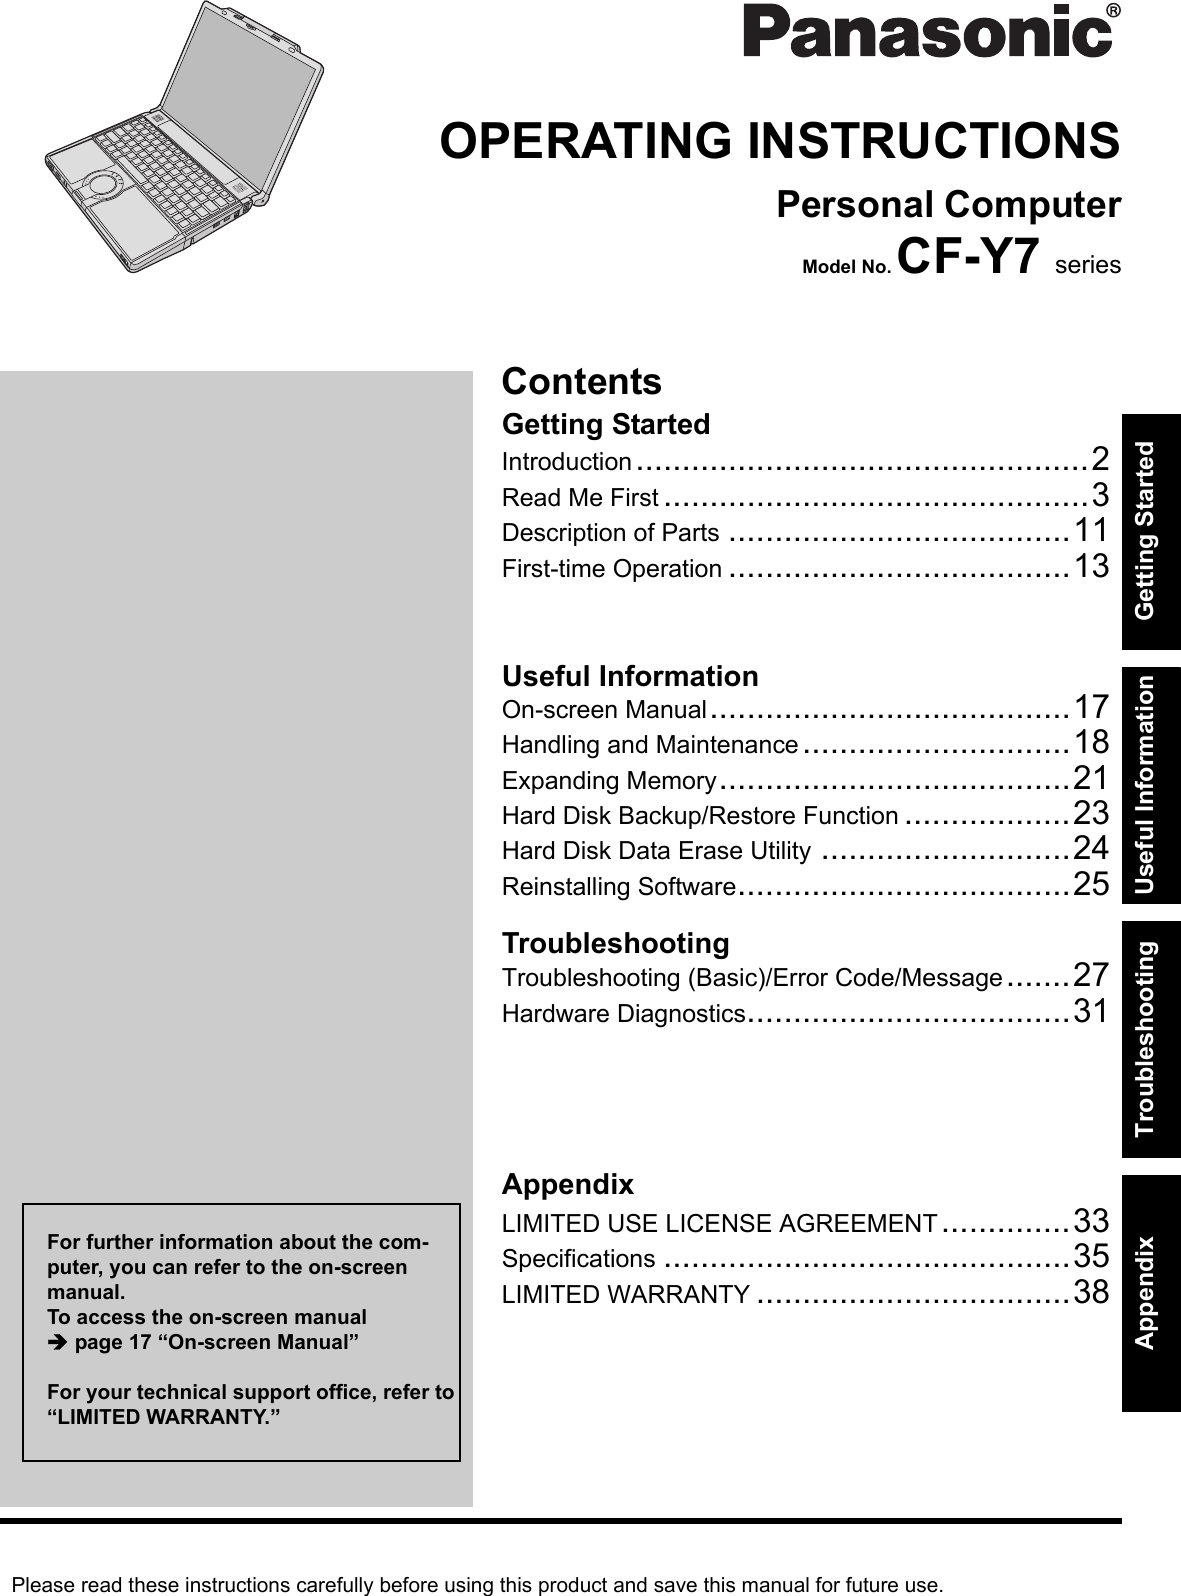 Please read these instructions carefully before using this product and save this manual for future use.ContentsGetting StartedUseful InformationTroubleshootingGetting StartedUseful InformationTroubleshootingAppendixAppendixOPERATING INSTRUCTIONSPersonal ComputerModel No. CF-Y7 seriesIntroduction.................................................2Read Me First ..............................................3Description of Parts .....................................11First-time Operation .....................................13On-screen Manual.......................................17Handling and Maintenance.............................18Expanding Memory......................................21Hard Disk Backup/Restore Function ..................23Hard Disk Data Erase Utility ...........................24Reinstalling Software....................................25Troubleshooting (Basic)/Error Code/Message.......27Hardware Diagnostics...................................31LIMITED USE LICENSE AGREEMENT..............33Specifications ............................................35LIMITED WARRANTY ..................................38For further information about the com-puter, you can refer to the on-screen manual.To access the on-screen manual Îpage 17 “On-screen Manual”For your technical support office, refer to “LIMITED WARRANTY.”